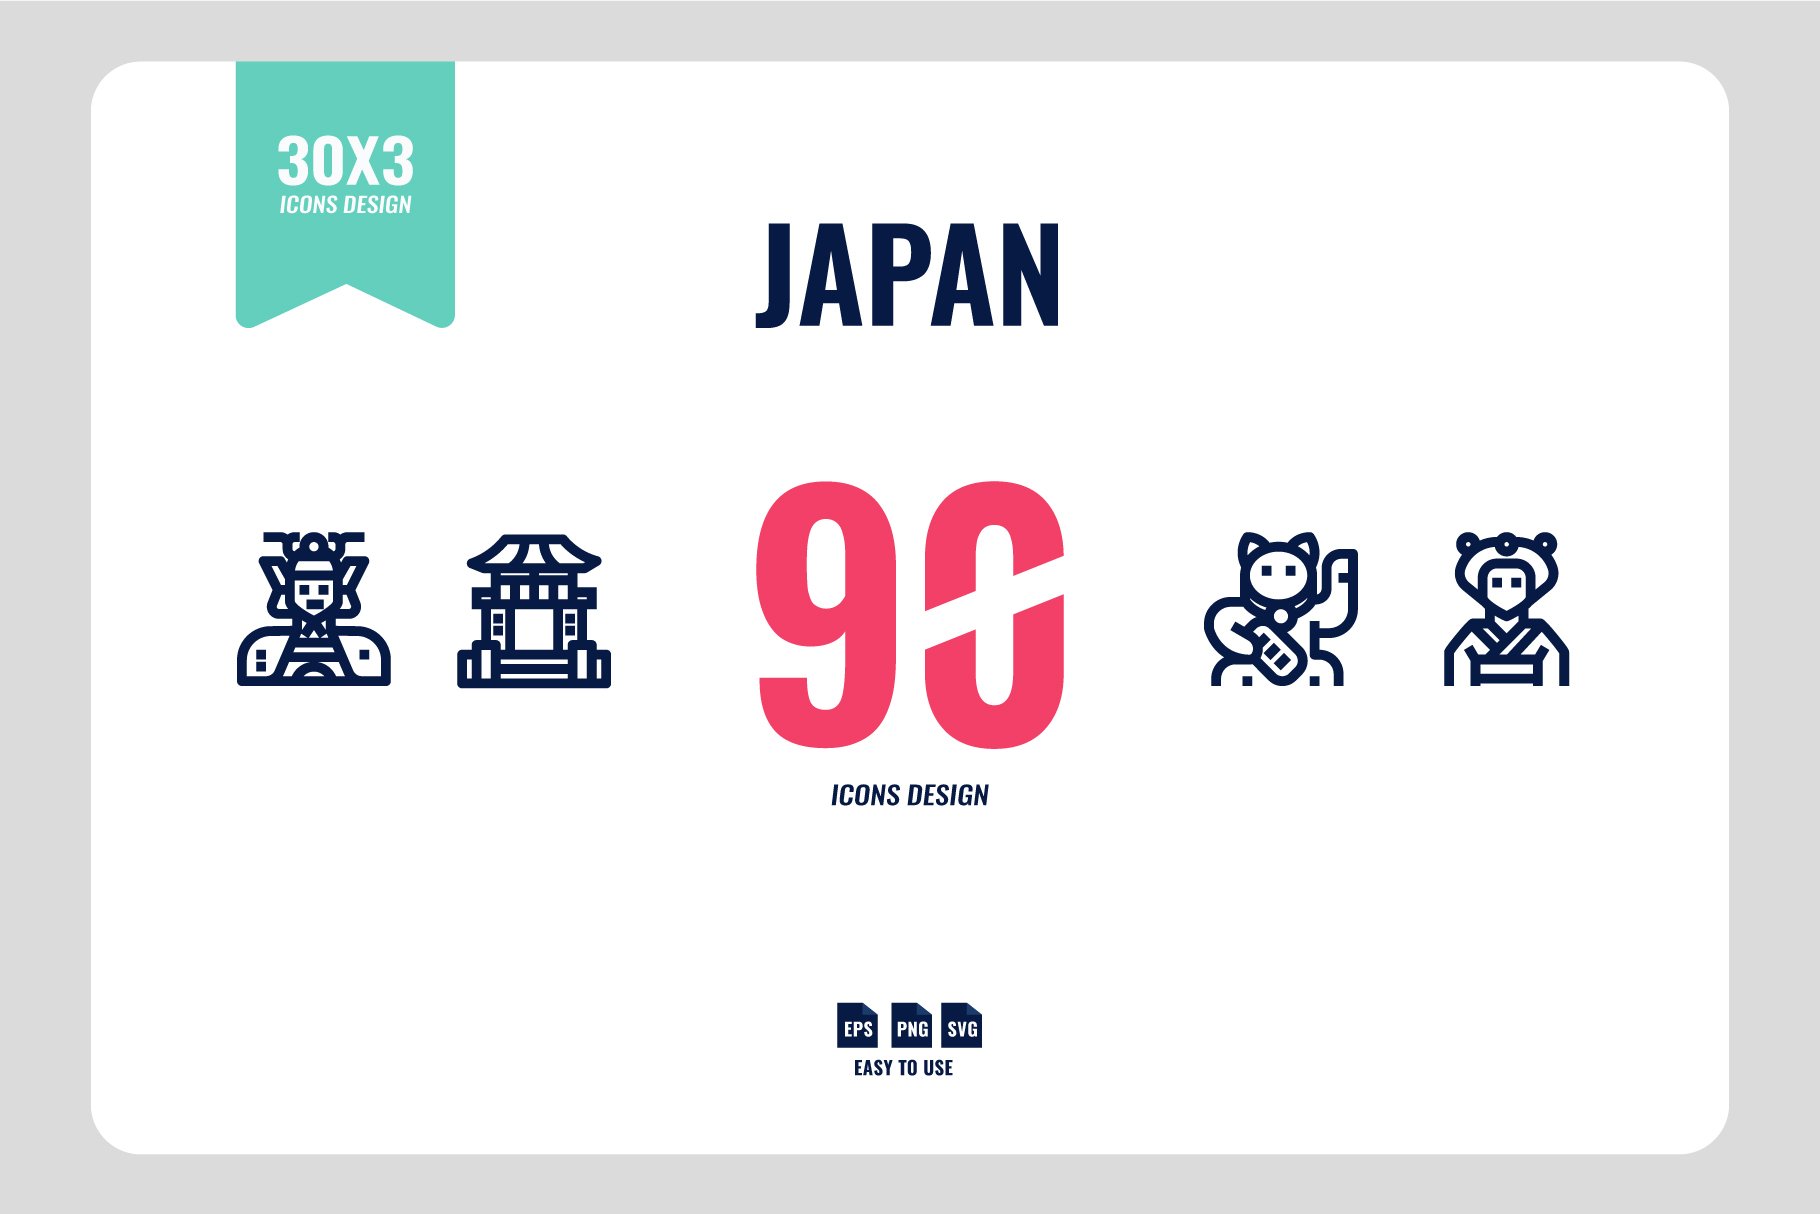 Japan 90 Icons cover image.